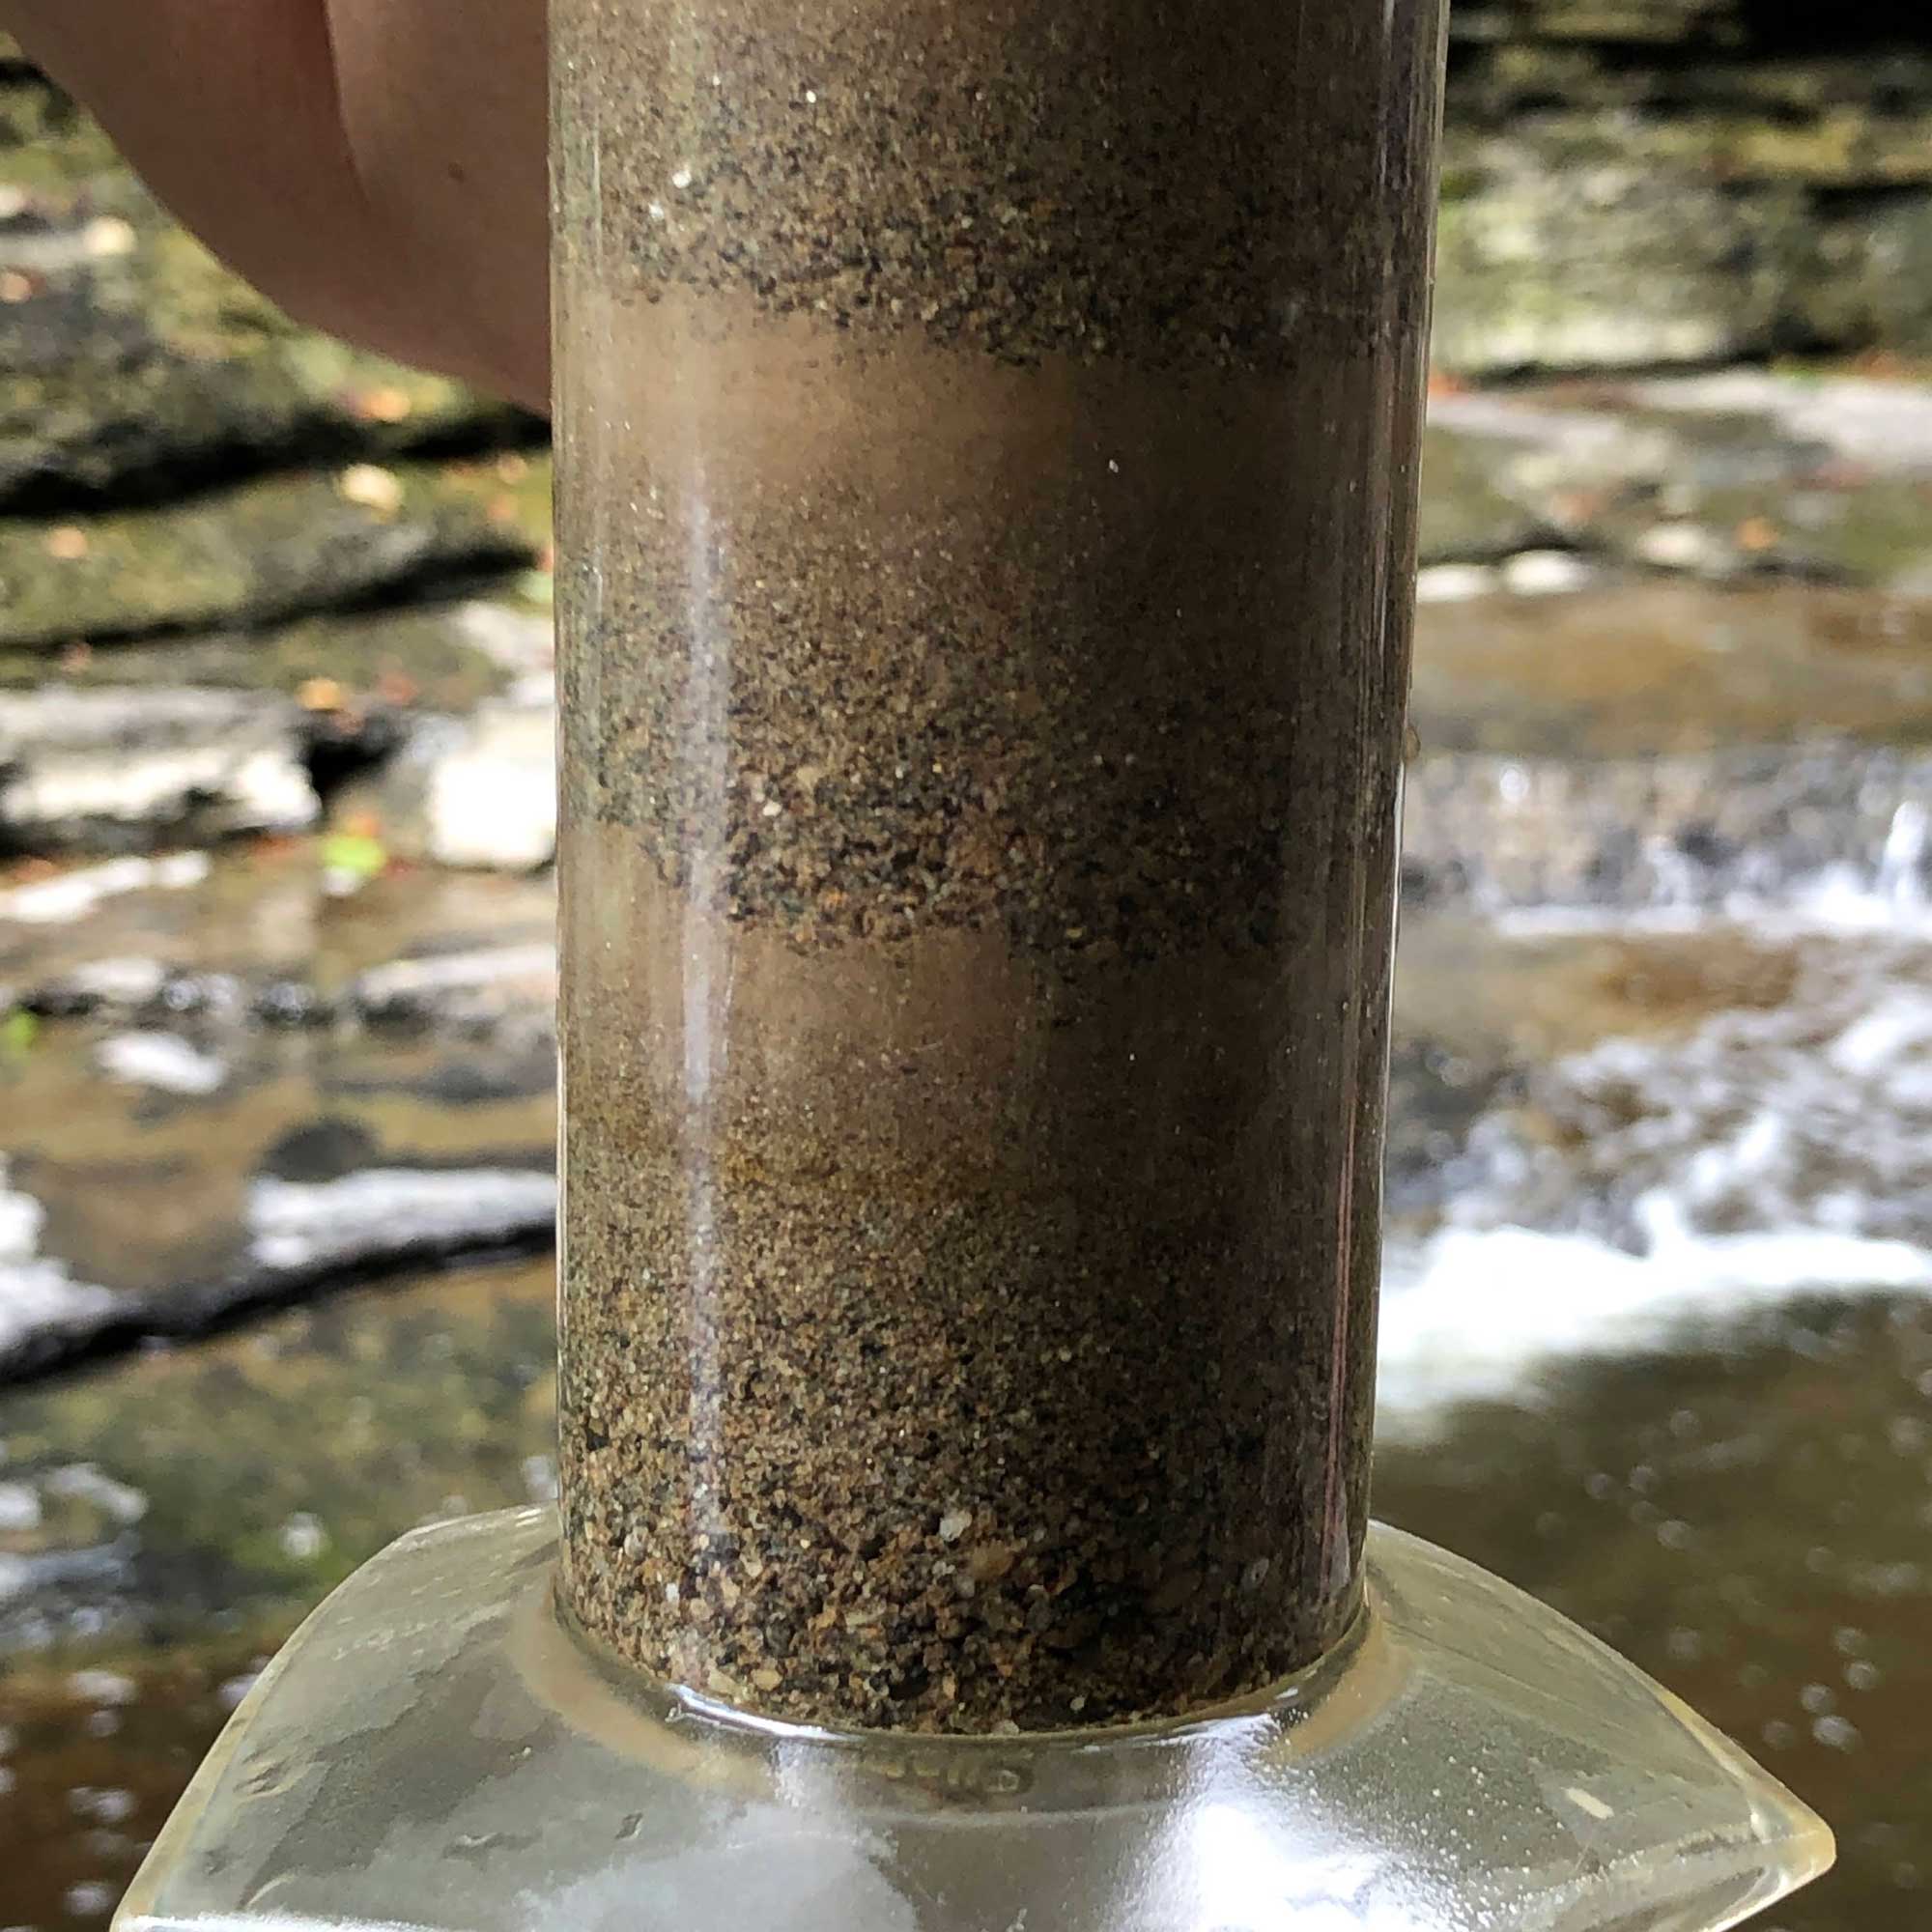 Photograph of a graduate cylinder with layers of sediment inside.